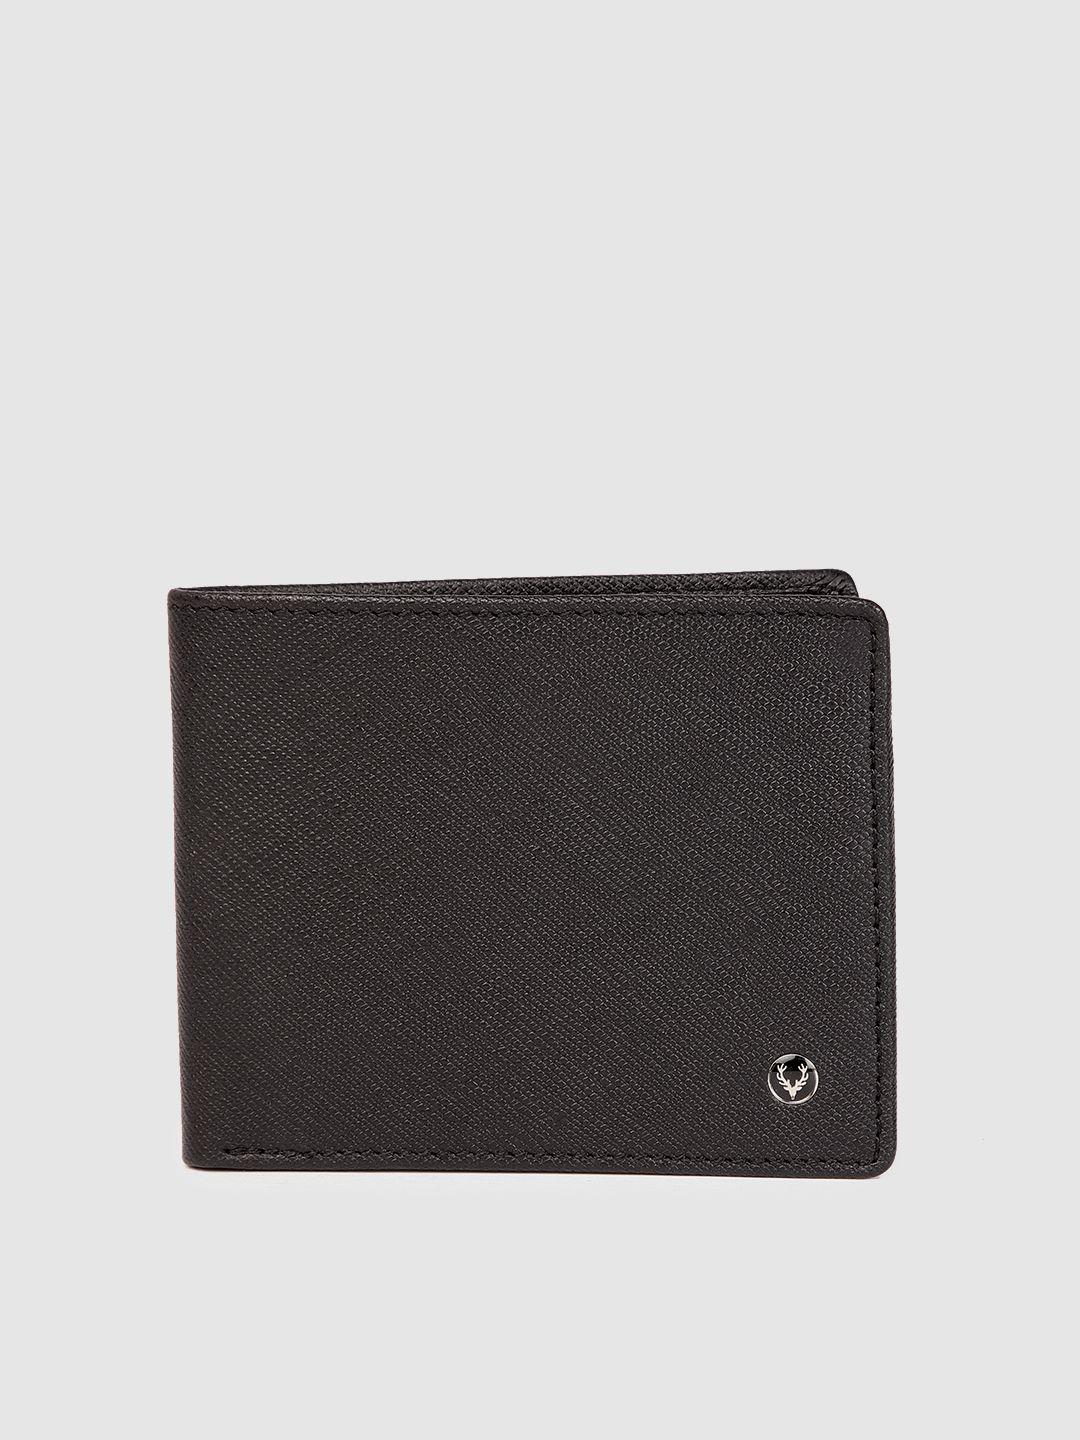 allen solly men textured leather two fold wallet